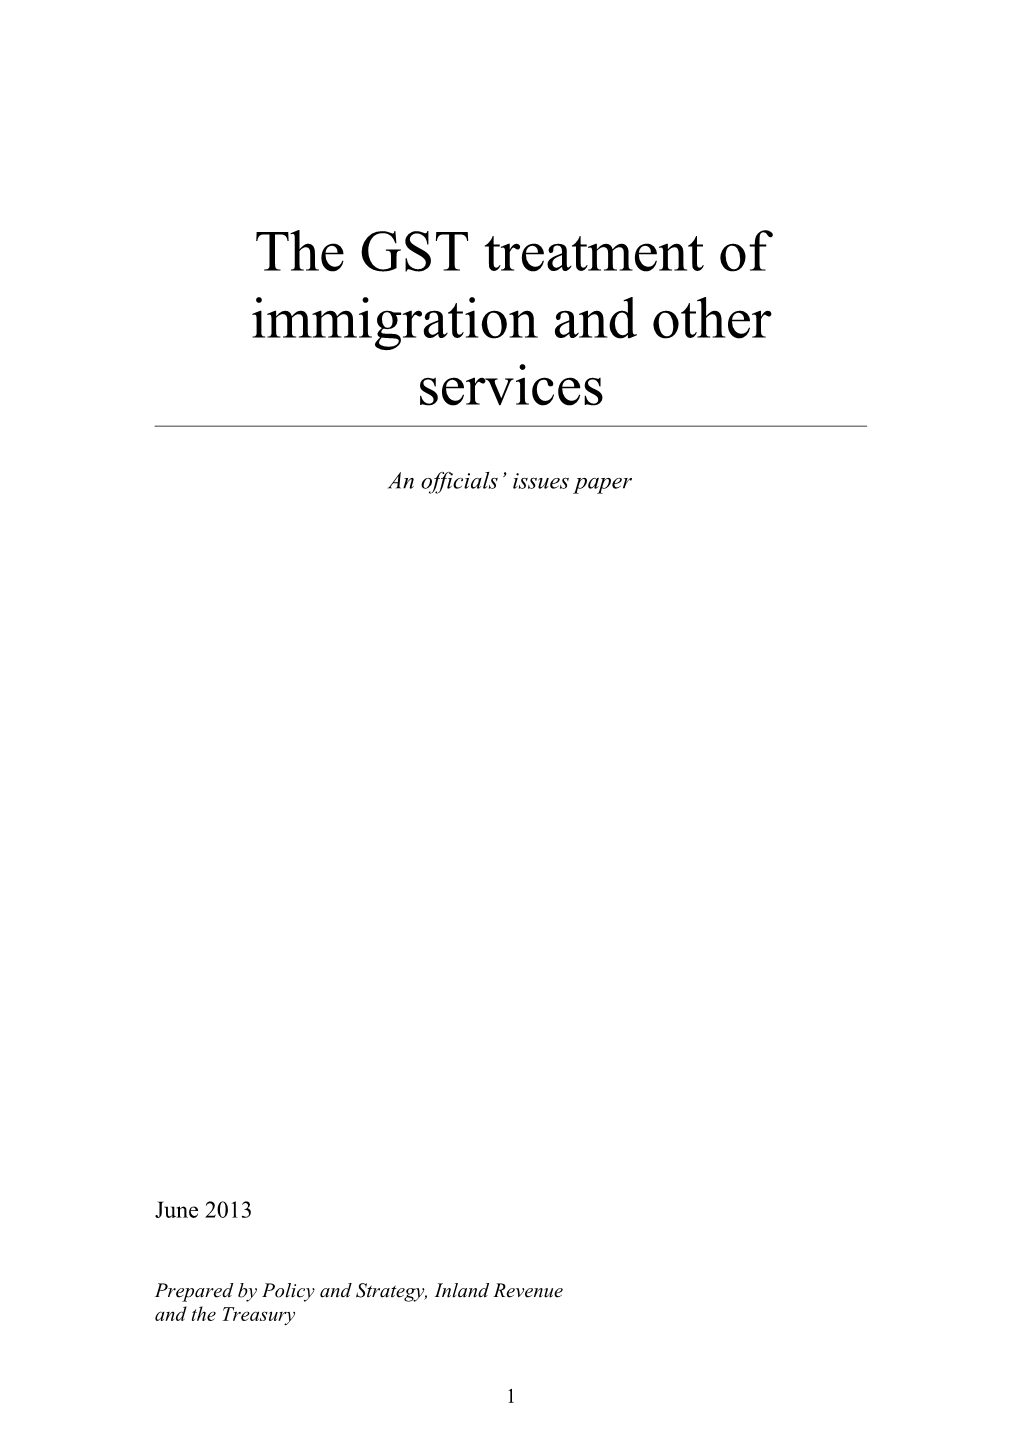 The GST Treatment of Immigration and Other Services - an Officials' Issues Paper